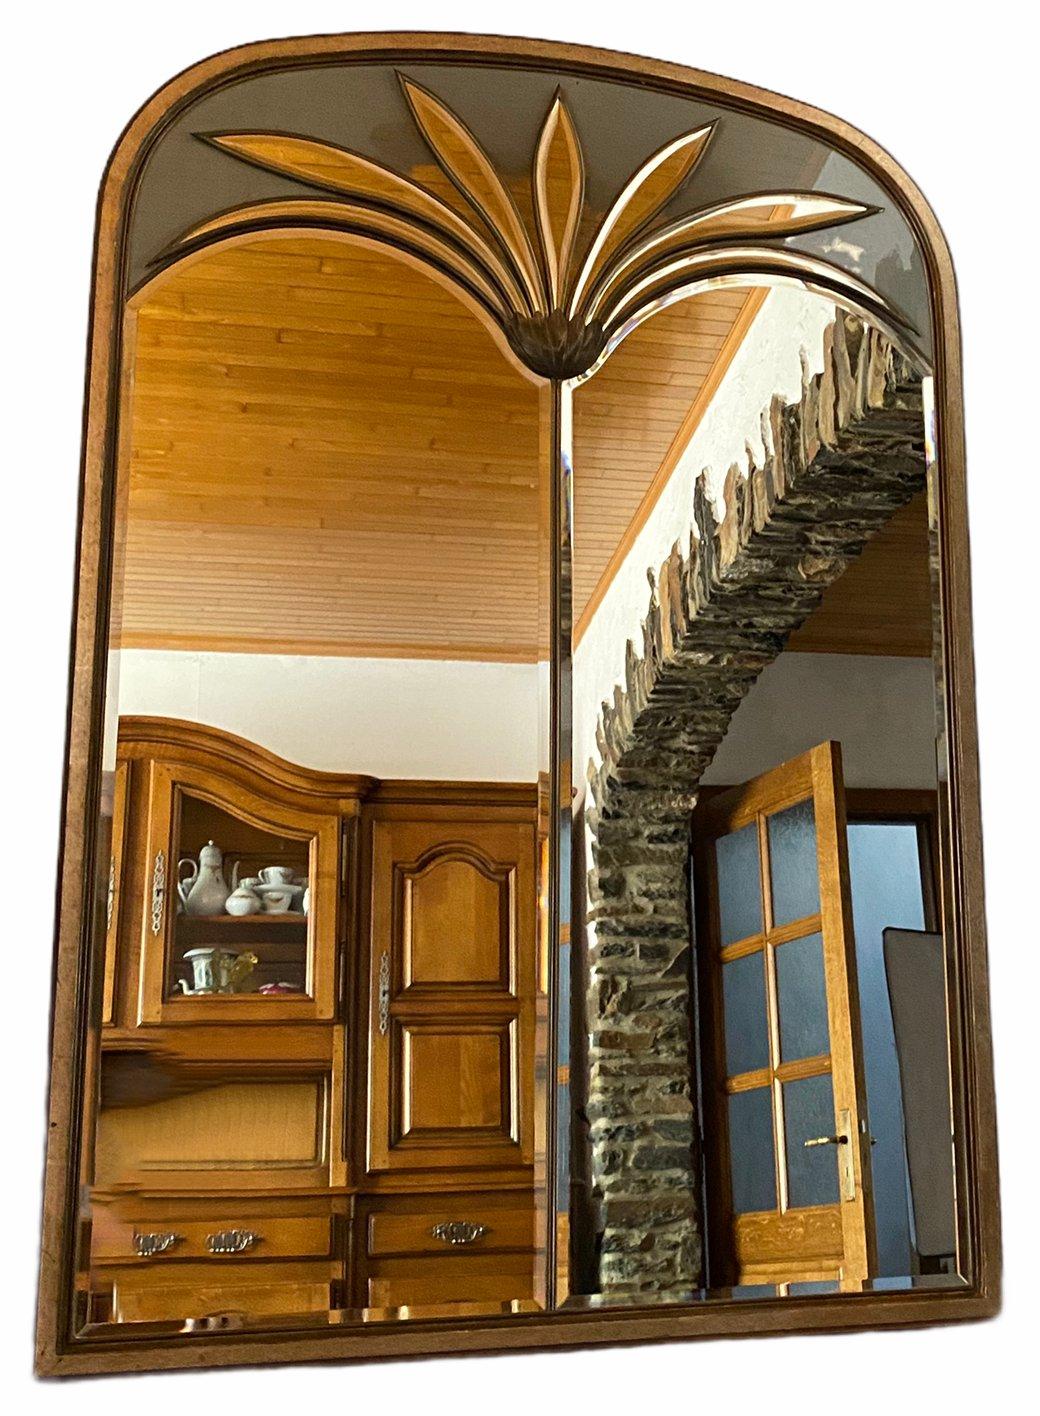 Art Nouveau style Mirror  Large Wall Mirror  Mirror in the Wooden and Brass Frame  Brass Wall Mirorr with Decor  French Vintage Mirror  1950’s


Art Nouveau Style Wall Mirror.
French Mirror with Palm Tree Decor will be great element in the room